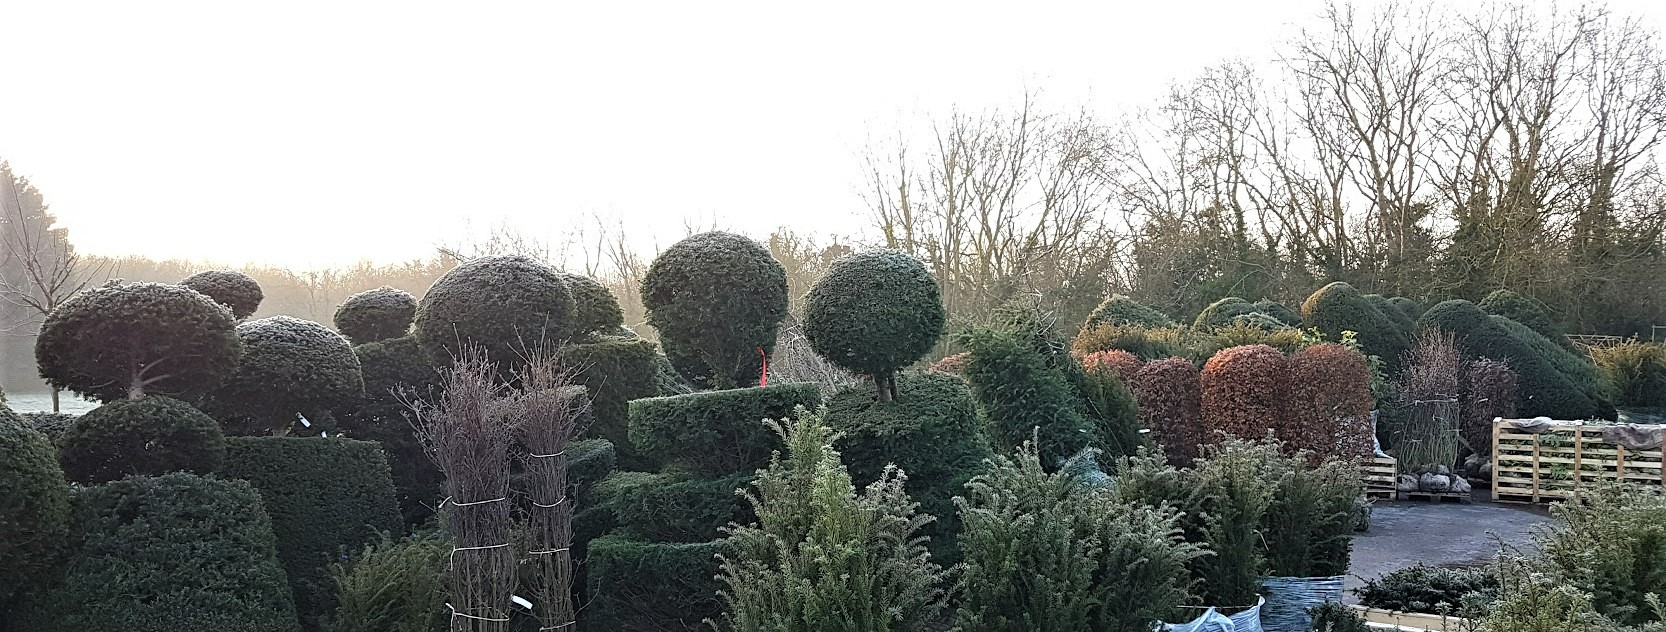 A sellection of large topiary plants in a yard at Kingsdown Nurseries